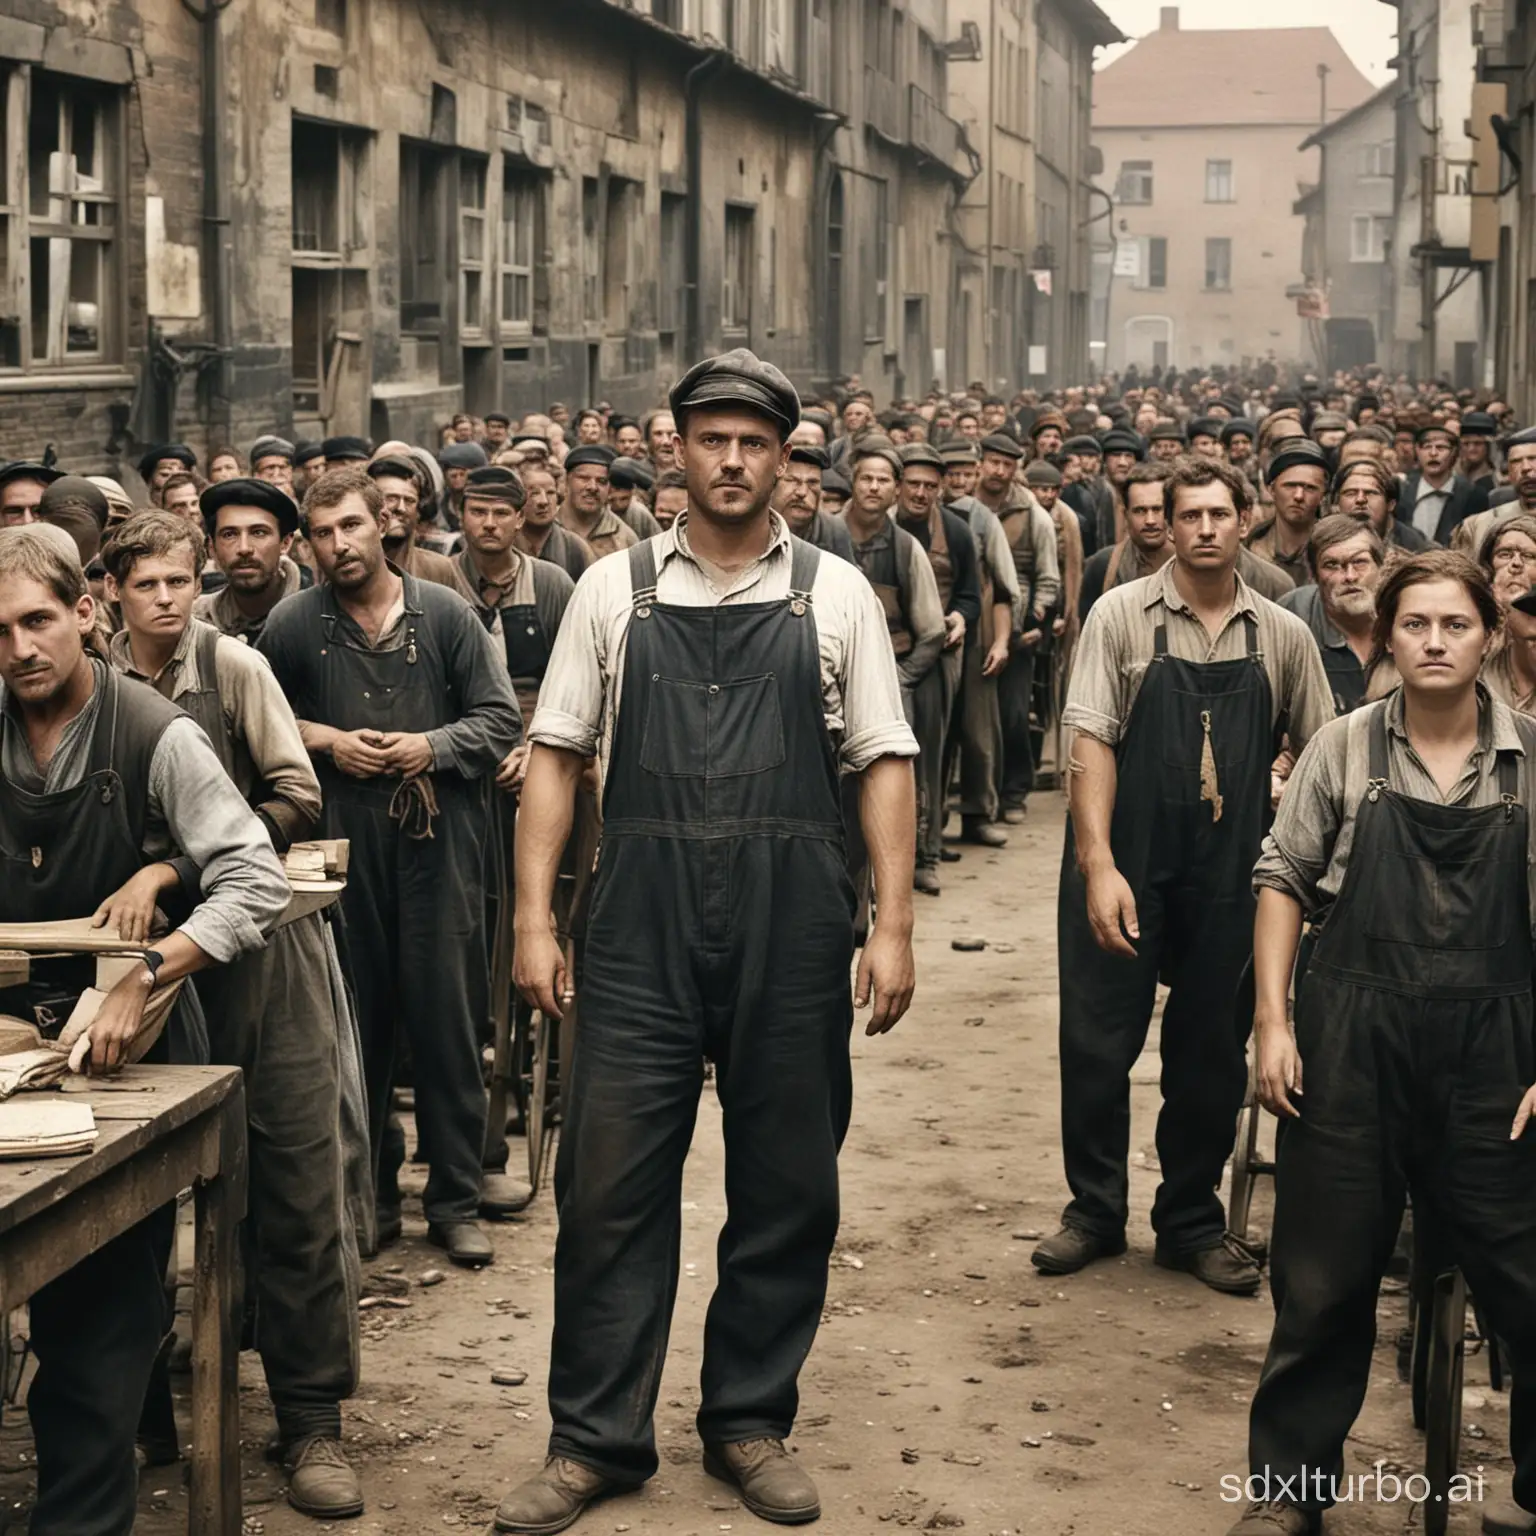 Show me the social question during the industrialization in Germany of the worker